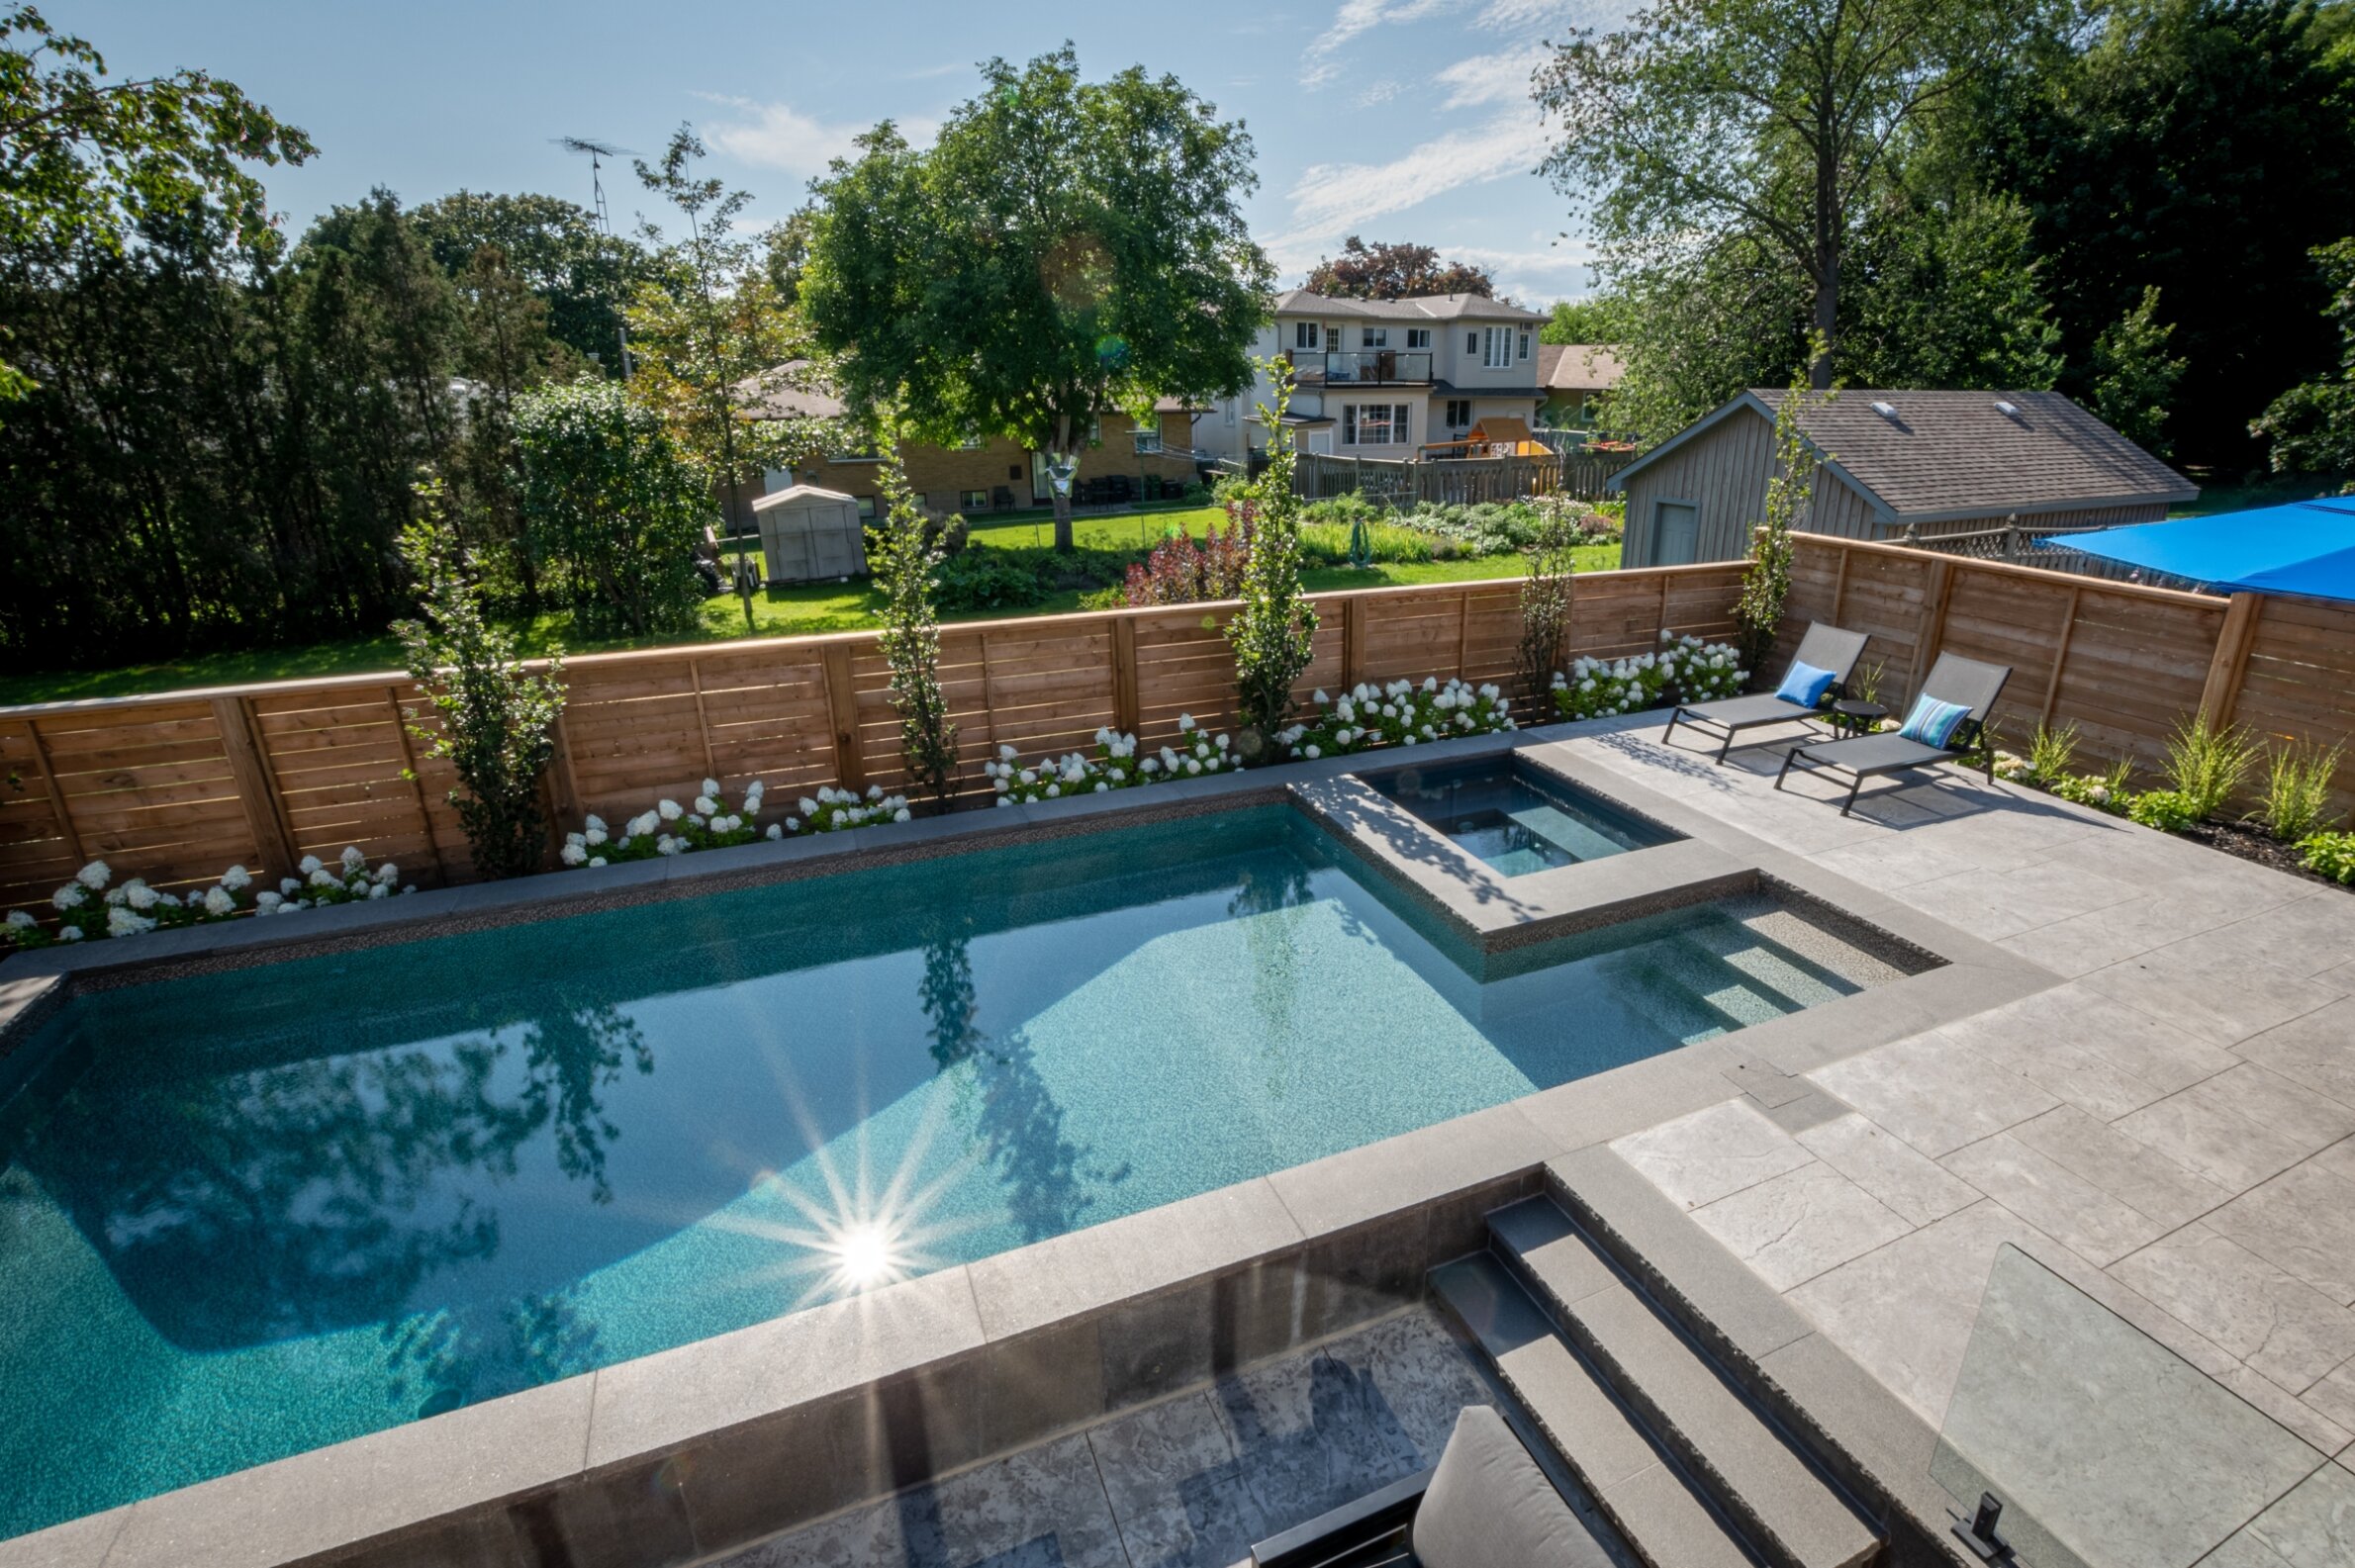 A sunny backyard with a rectangular swimming pool, lounging chairs, wooden fence, lush greenery, and a blue pool cover partially extended.